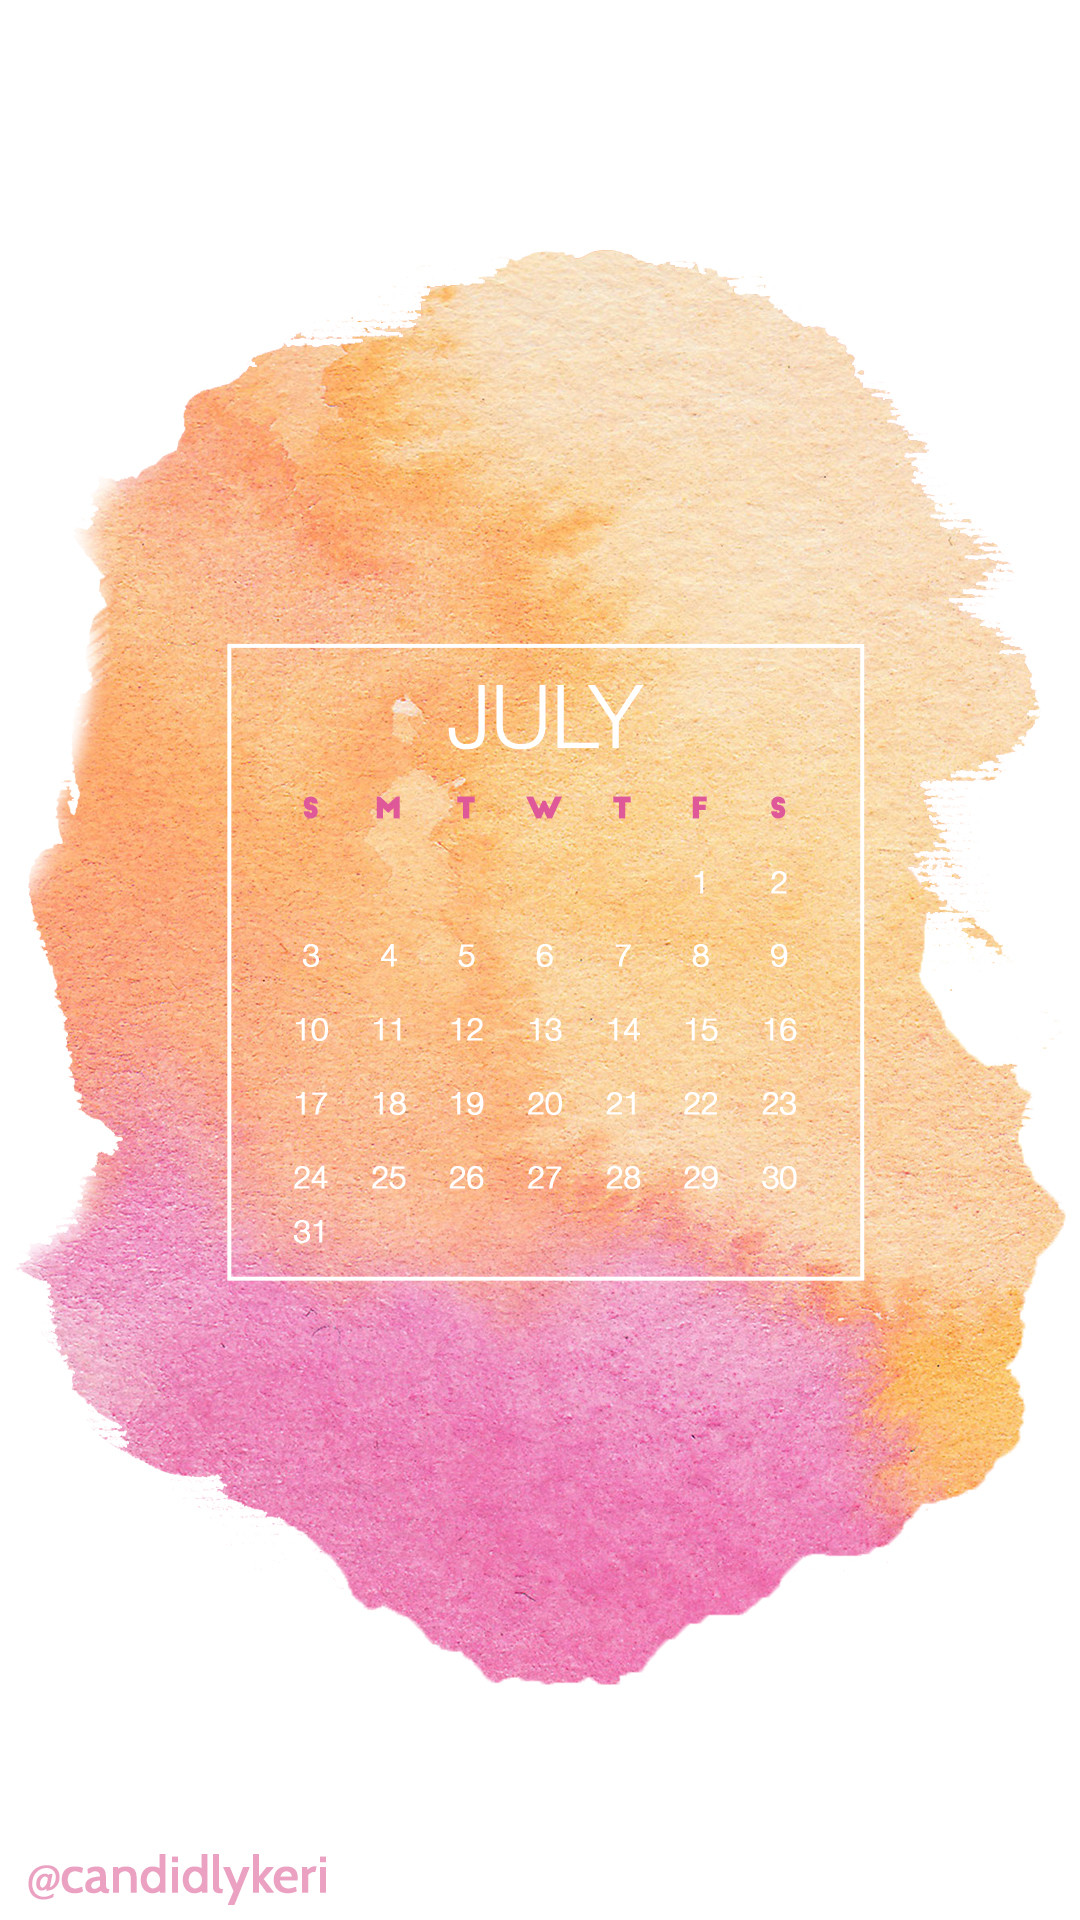 1080x1920 Pink and orange watercolor July 2016 calendar wallpaper free download for  iPhone android or desktop background